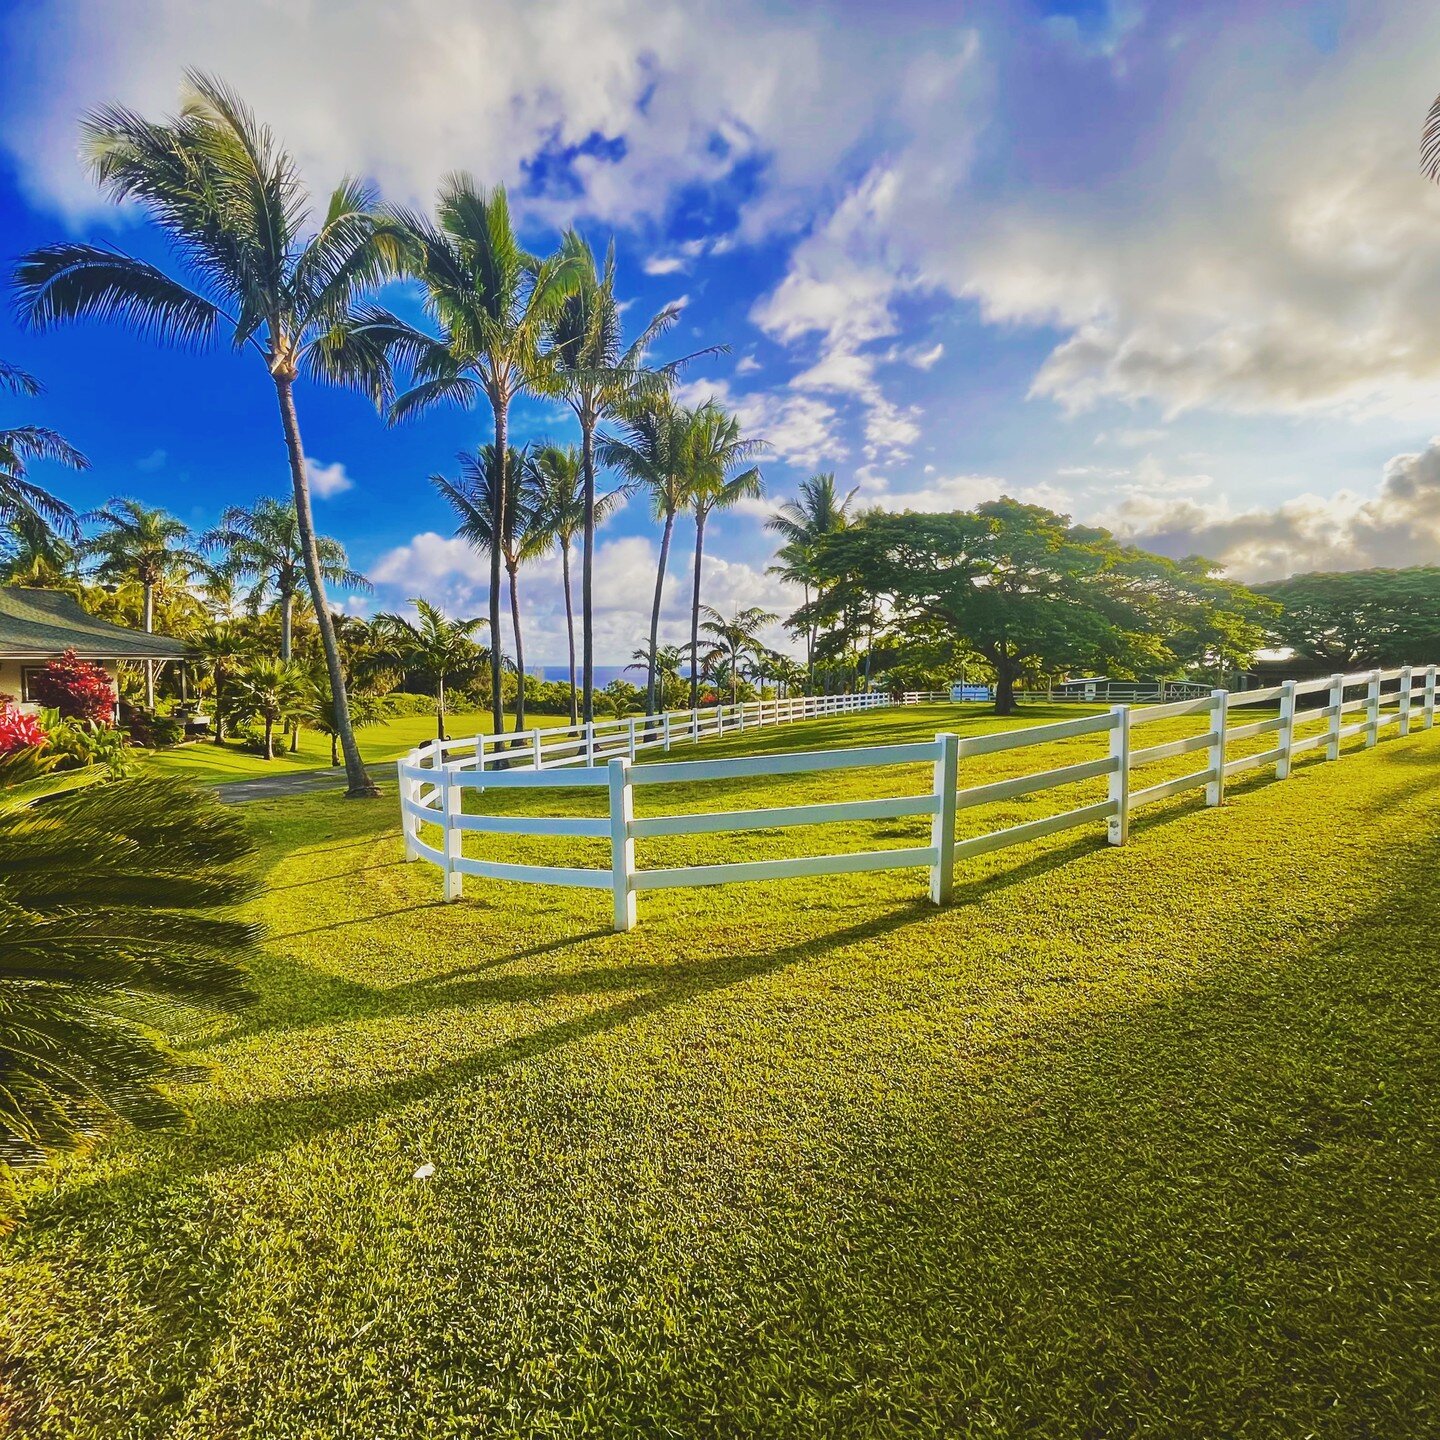 Its a beautiful morning in Pe'ahi, and clients are stoked their lawns are looking mow bettah&trade;! Are yours?

If you need you lawns looking their best, then give us a call and see why we're one of the top rated lawn care companies on Maui! 

North